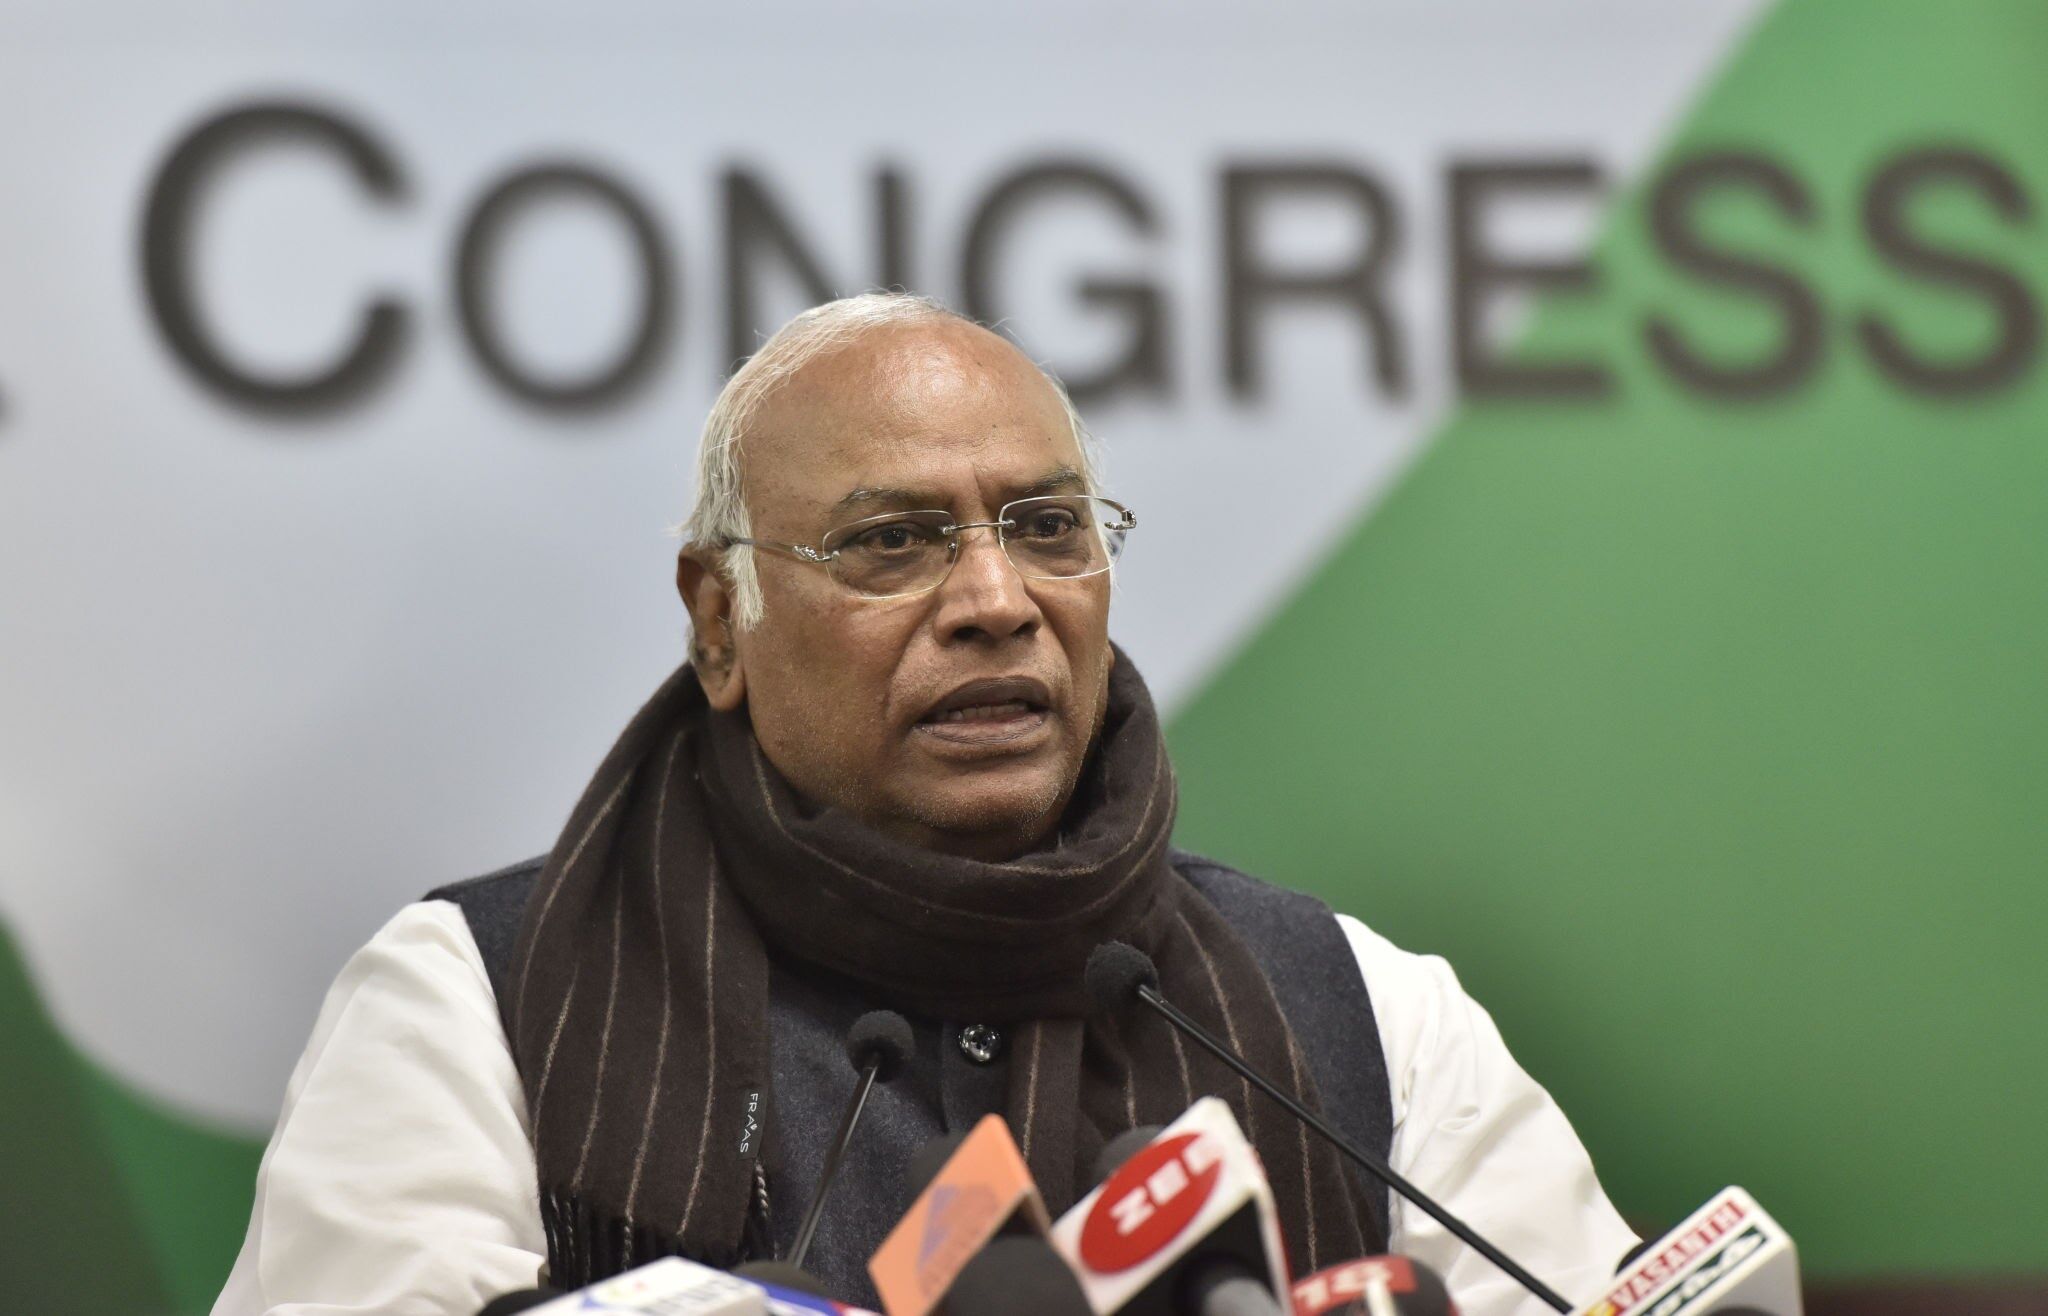 Mallikarjun Kharge said that he got the post of Congress President at the behest of Sonia Gandhi and Rahul